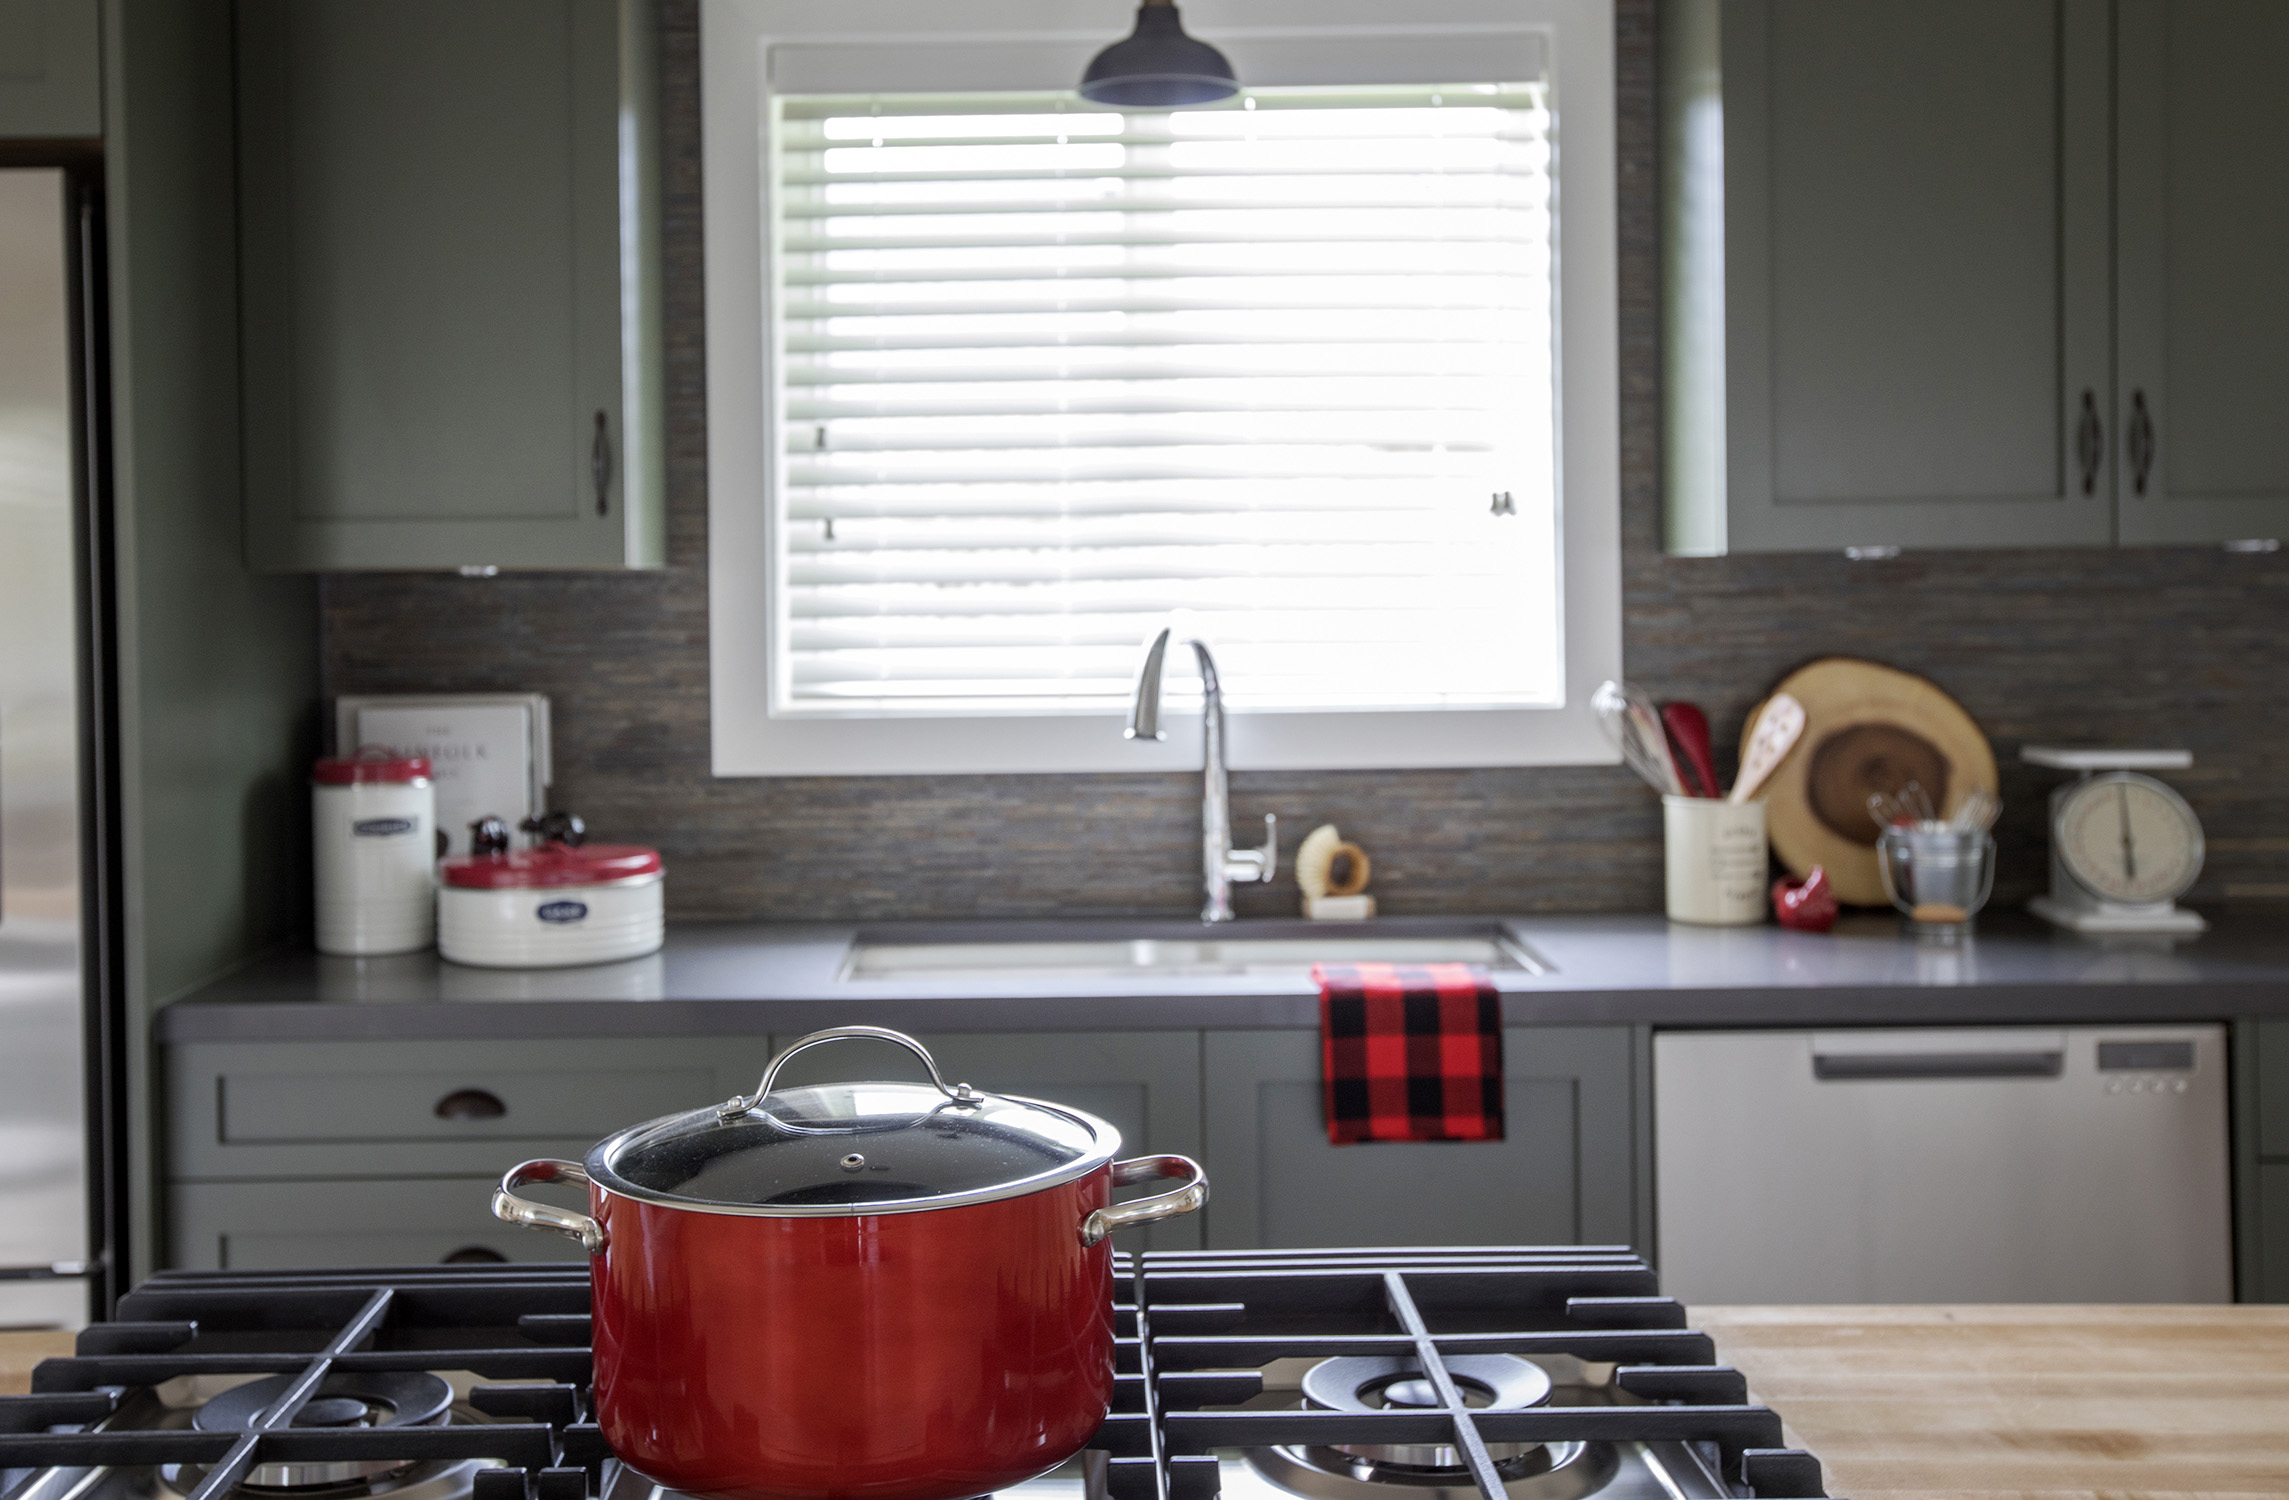 Making use of the complementary colour wheel, ruby-red kitchen accessories are set off against the sage-green cabinetry.